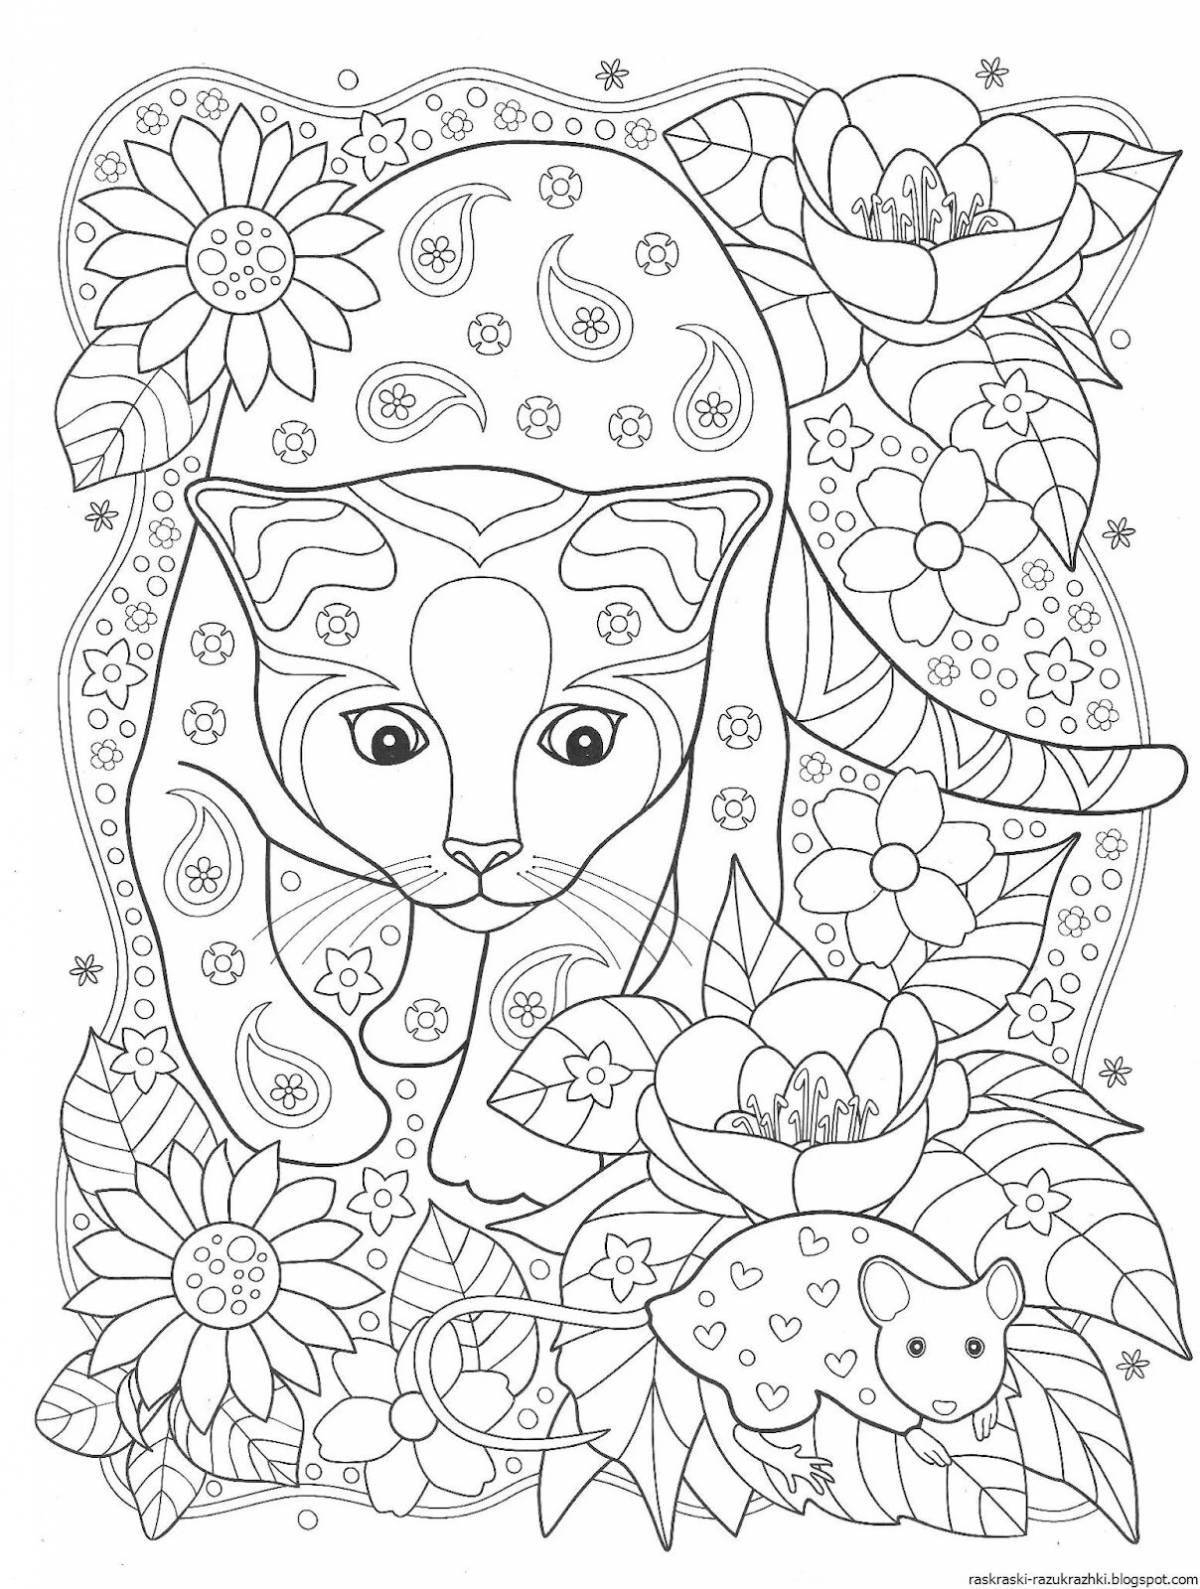 Amazing anti-stress coloring book for girls 9-10 years old